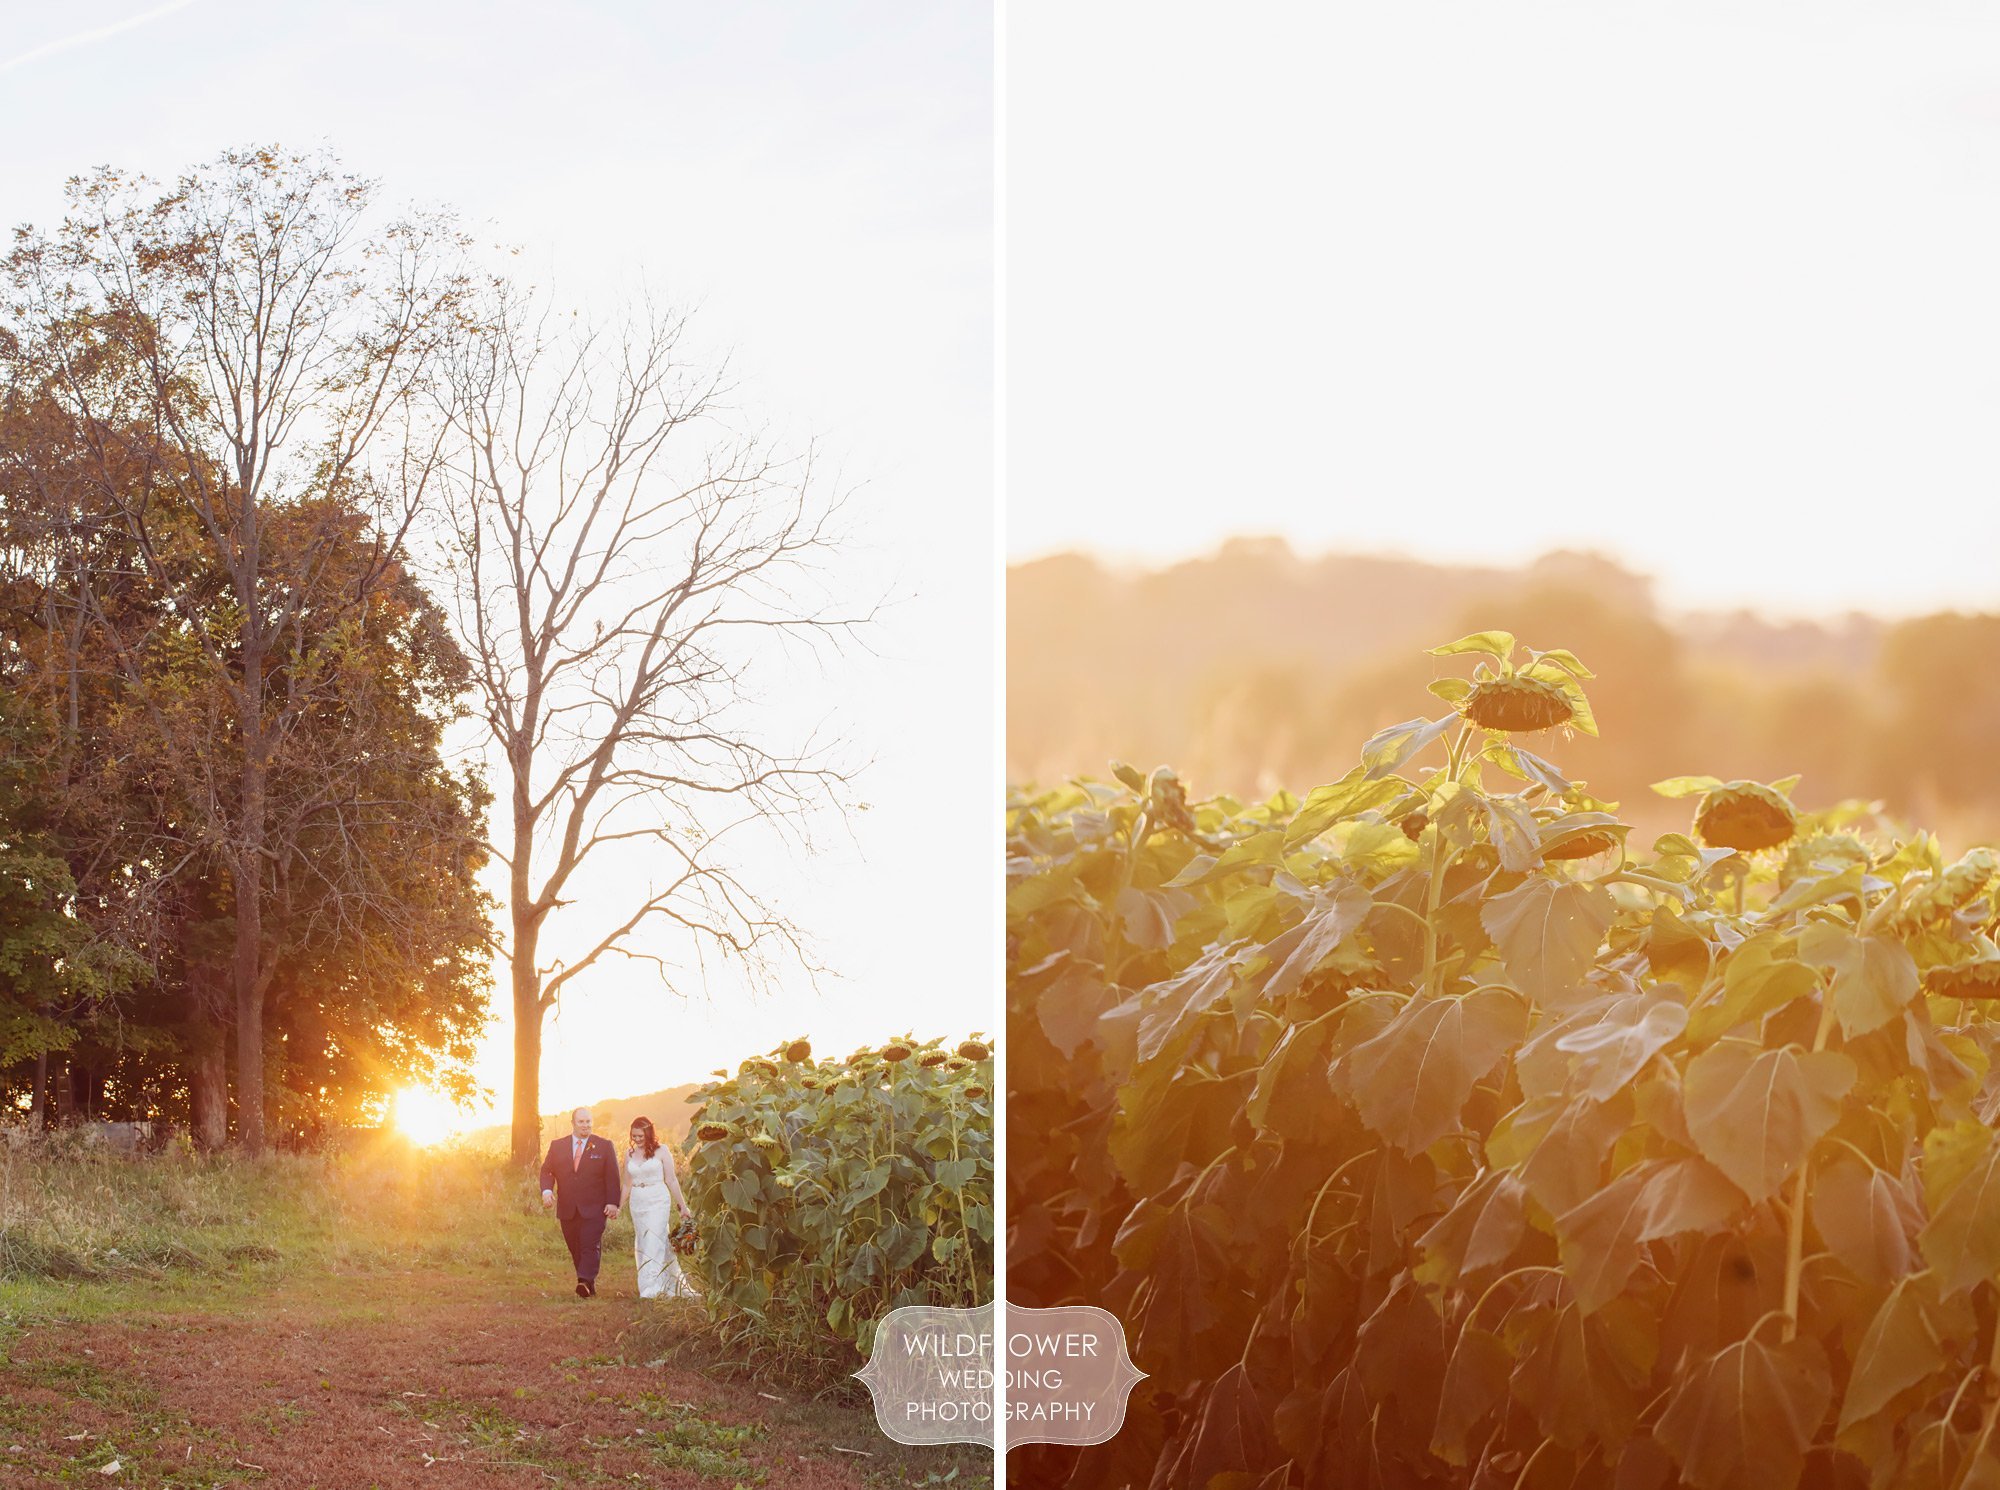 Photos of the bride and groom at sunset at the Schwinn Produce Farm venue.